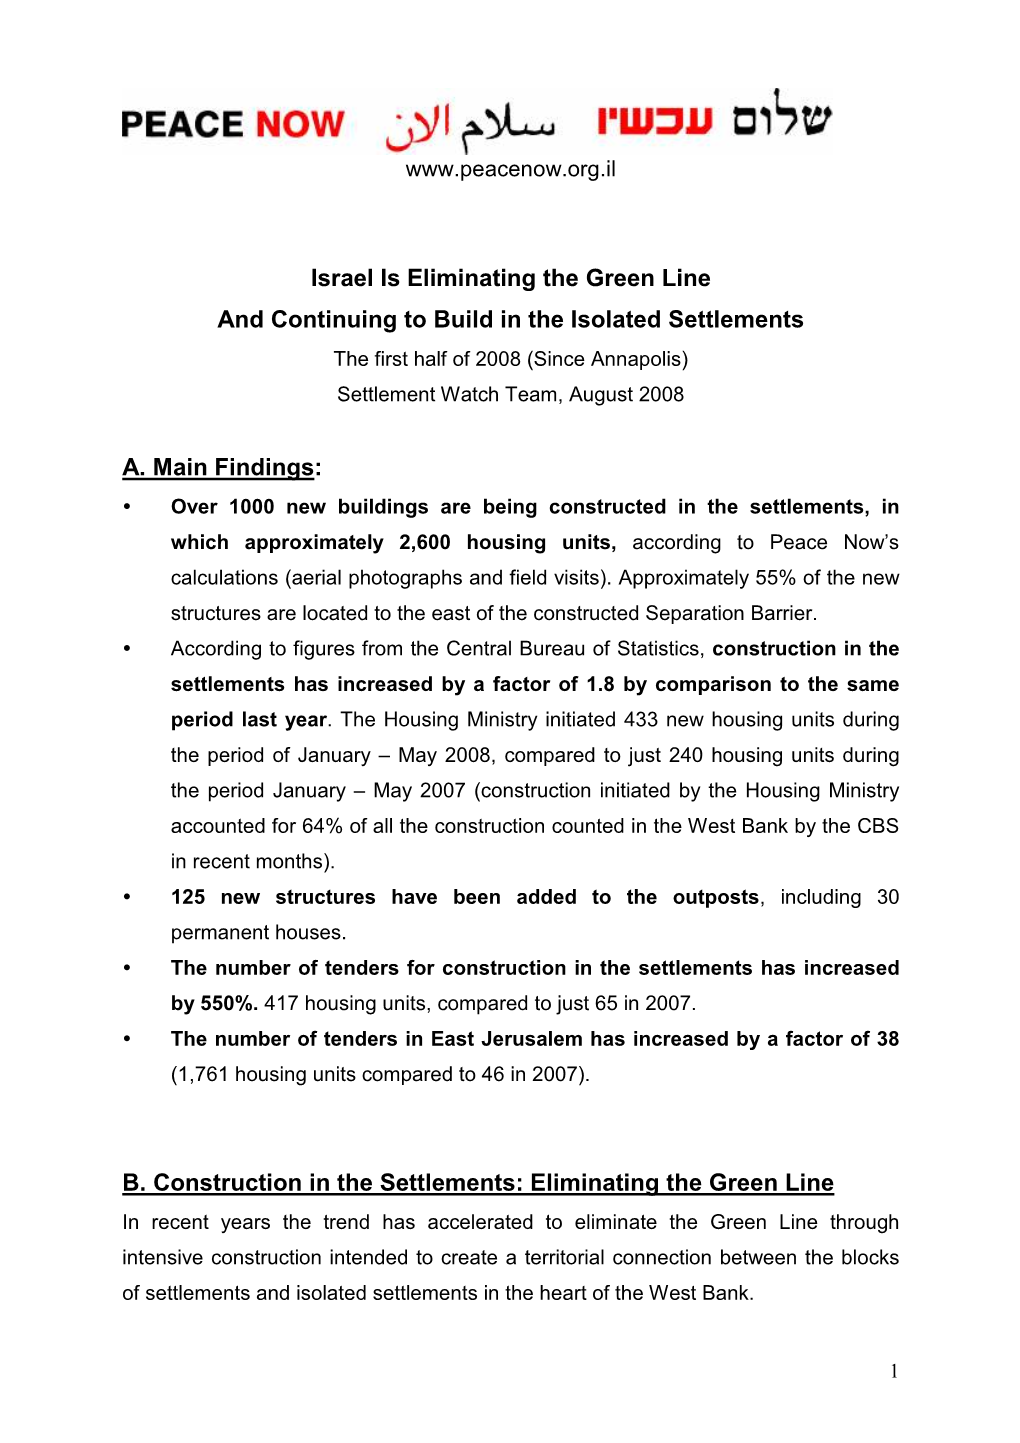 Israel Is Eliminating the Green Line and Continuing to Build in the Isolated Settlements the First Half of 2008 (Since Annapolis) Settlement Watch Team, August 2008